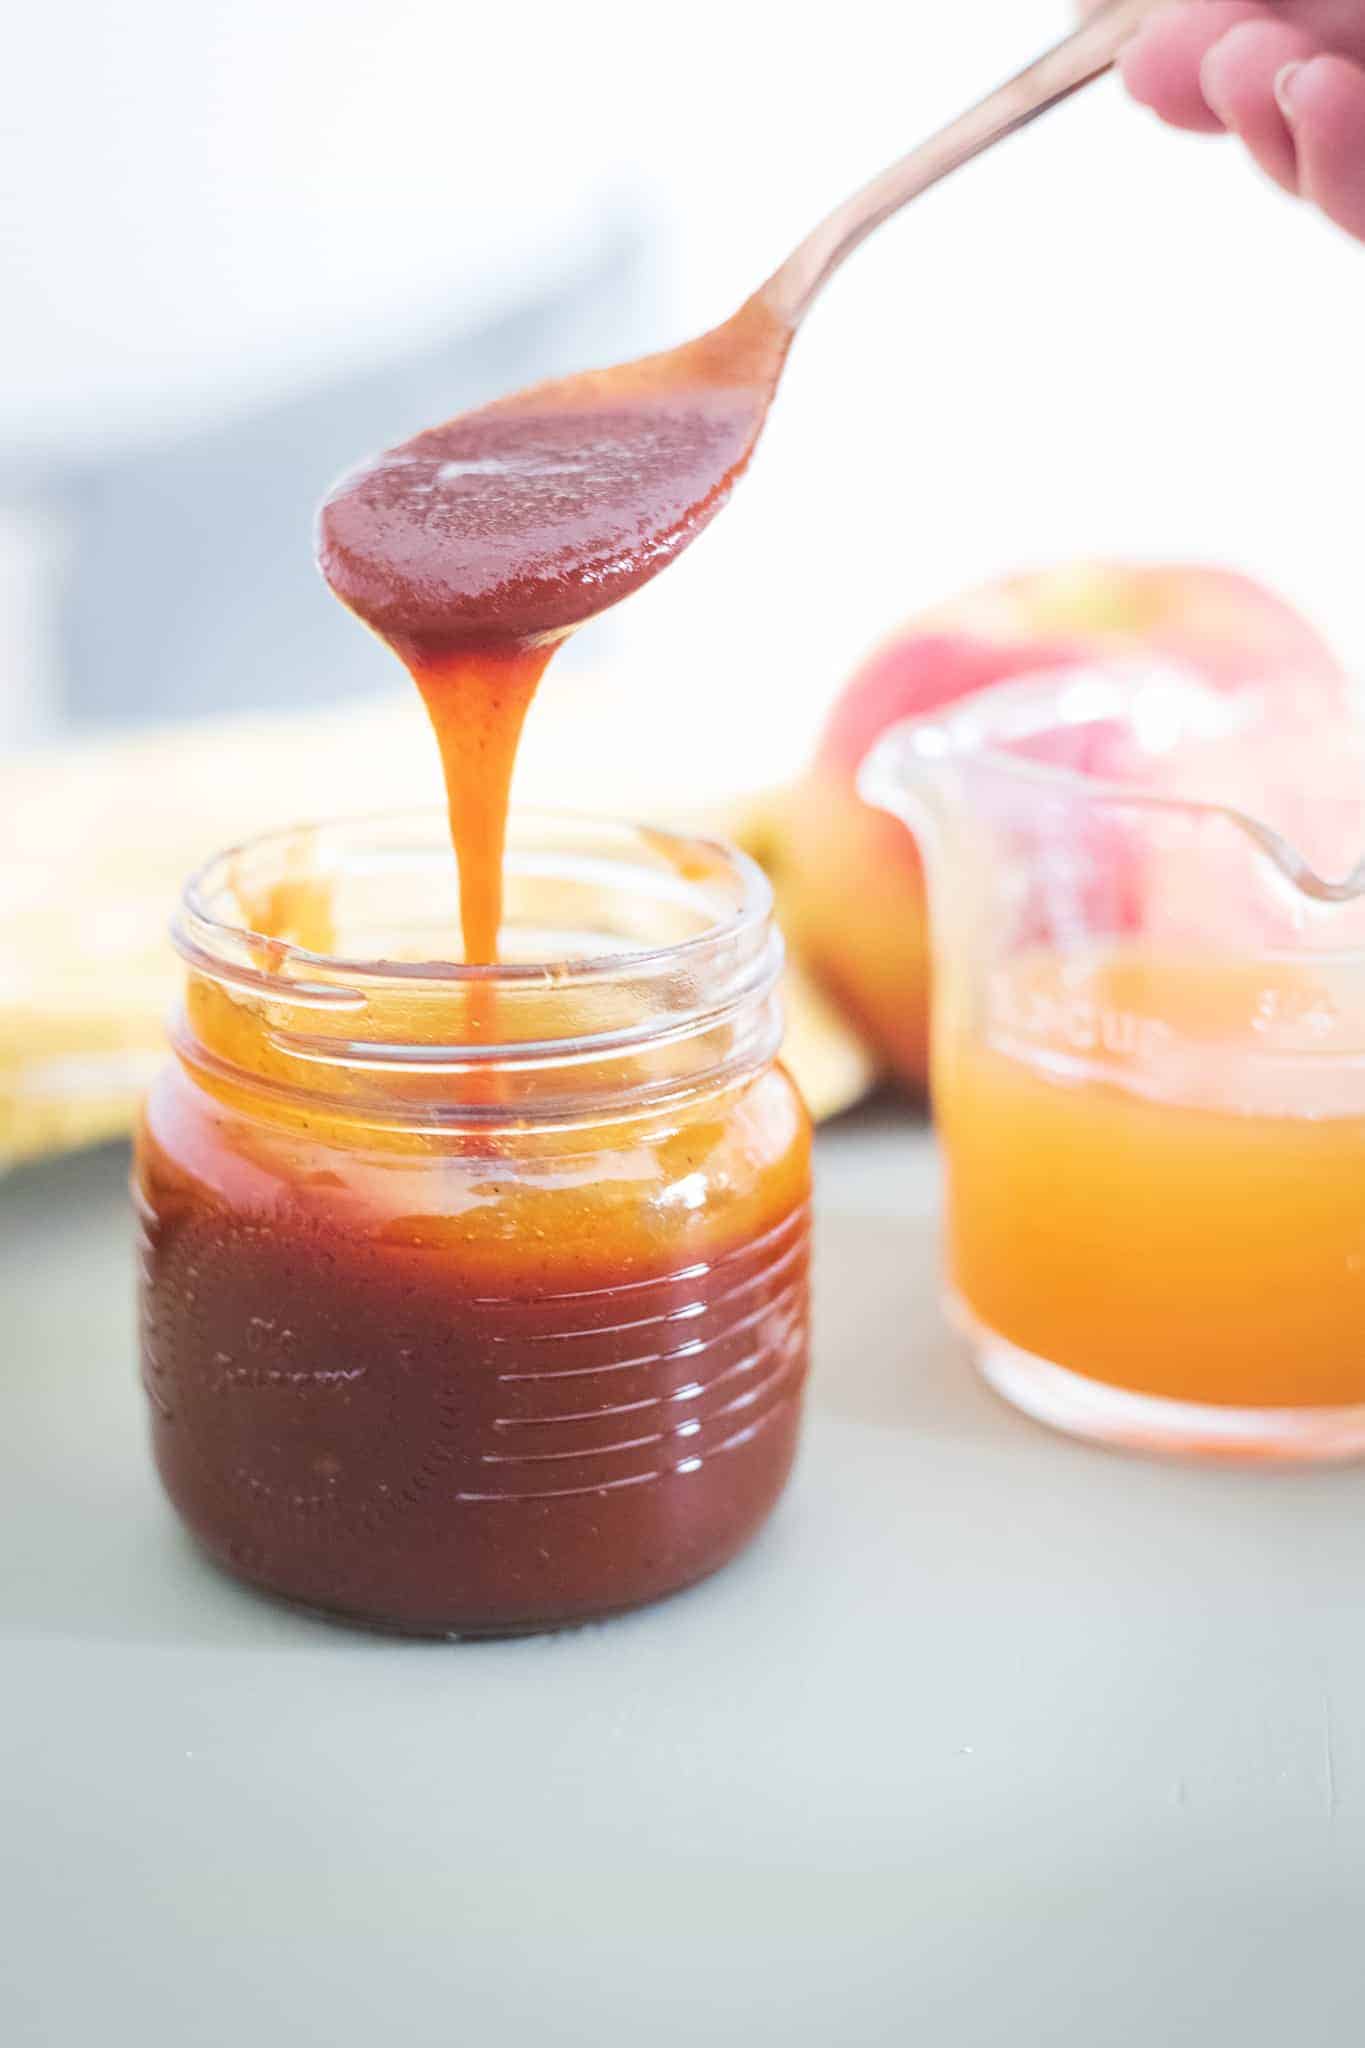 Apple cider BBQ sauce dripping off a spoon.